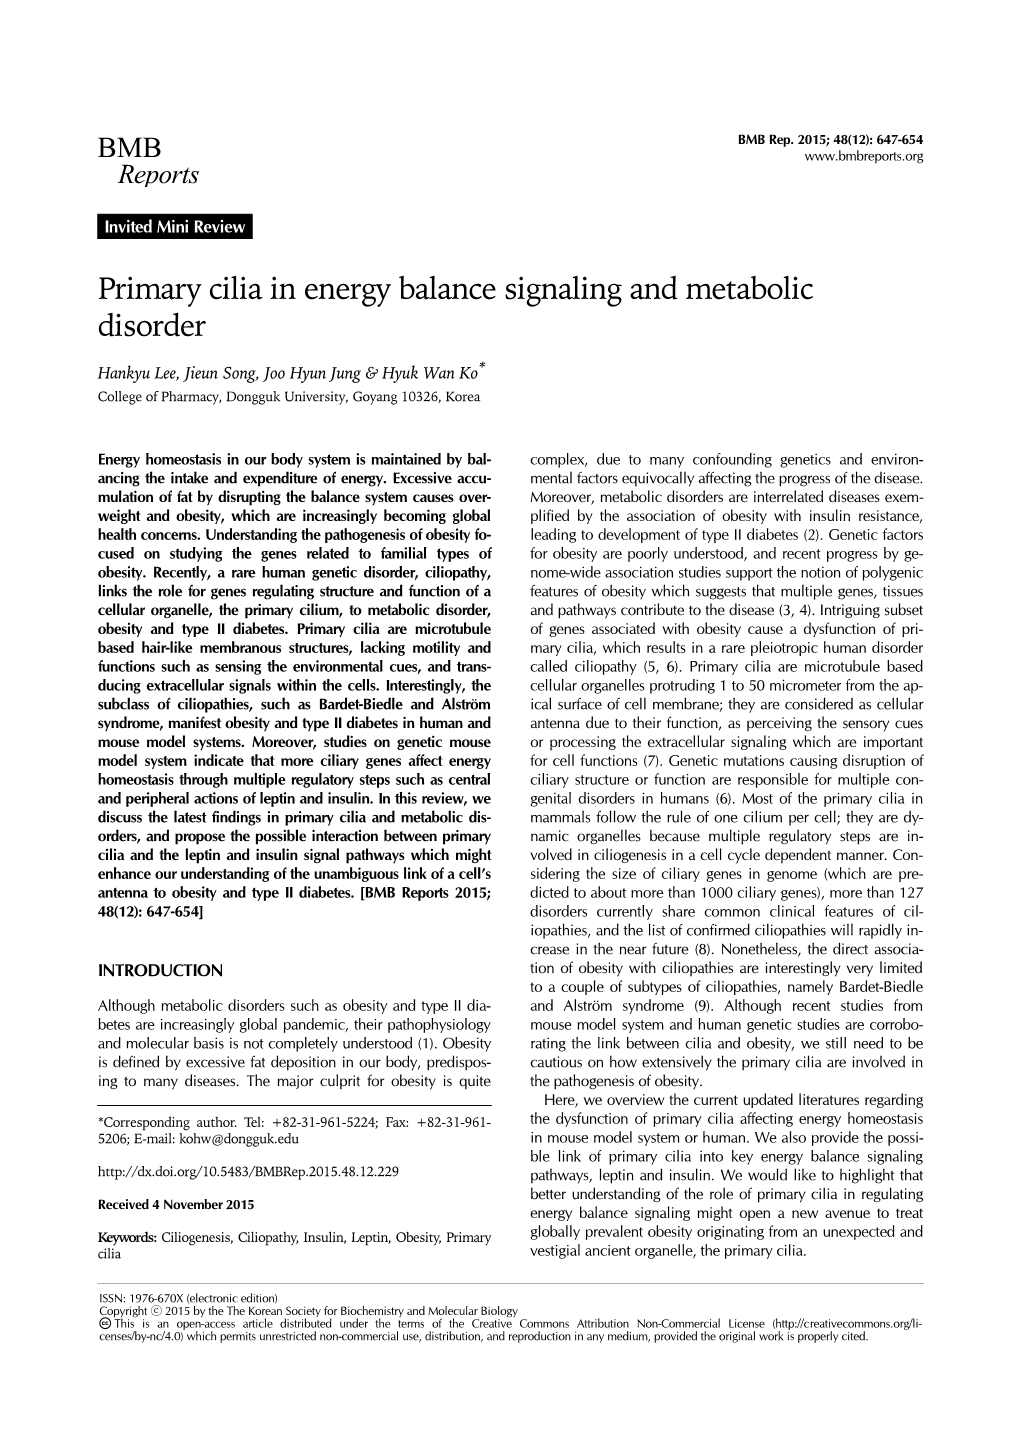 Primary Cilia in Energy Balance Signaling and Metabolic Disorder